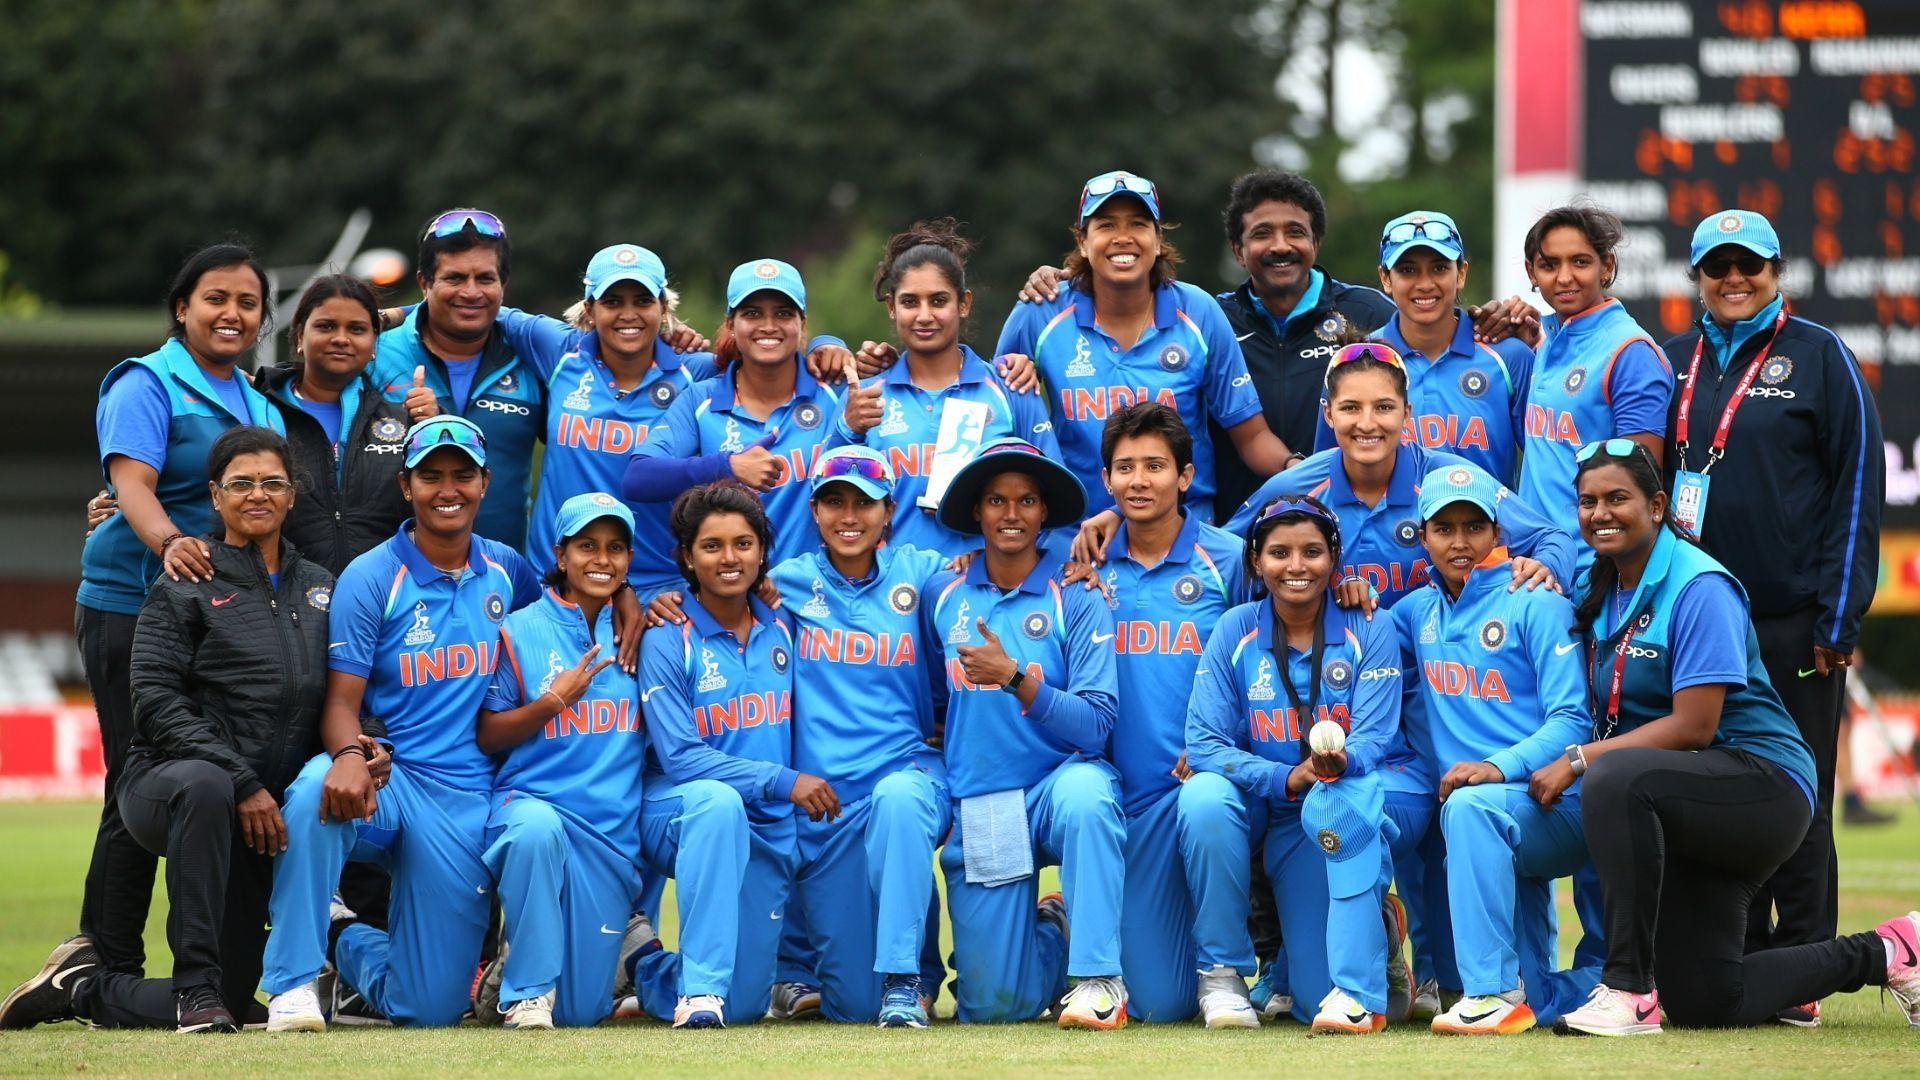 Hd Image Of Indian Cricket Team. nike unveils innovative t20